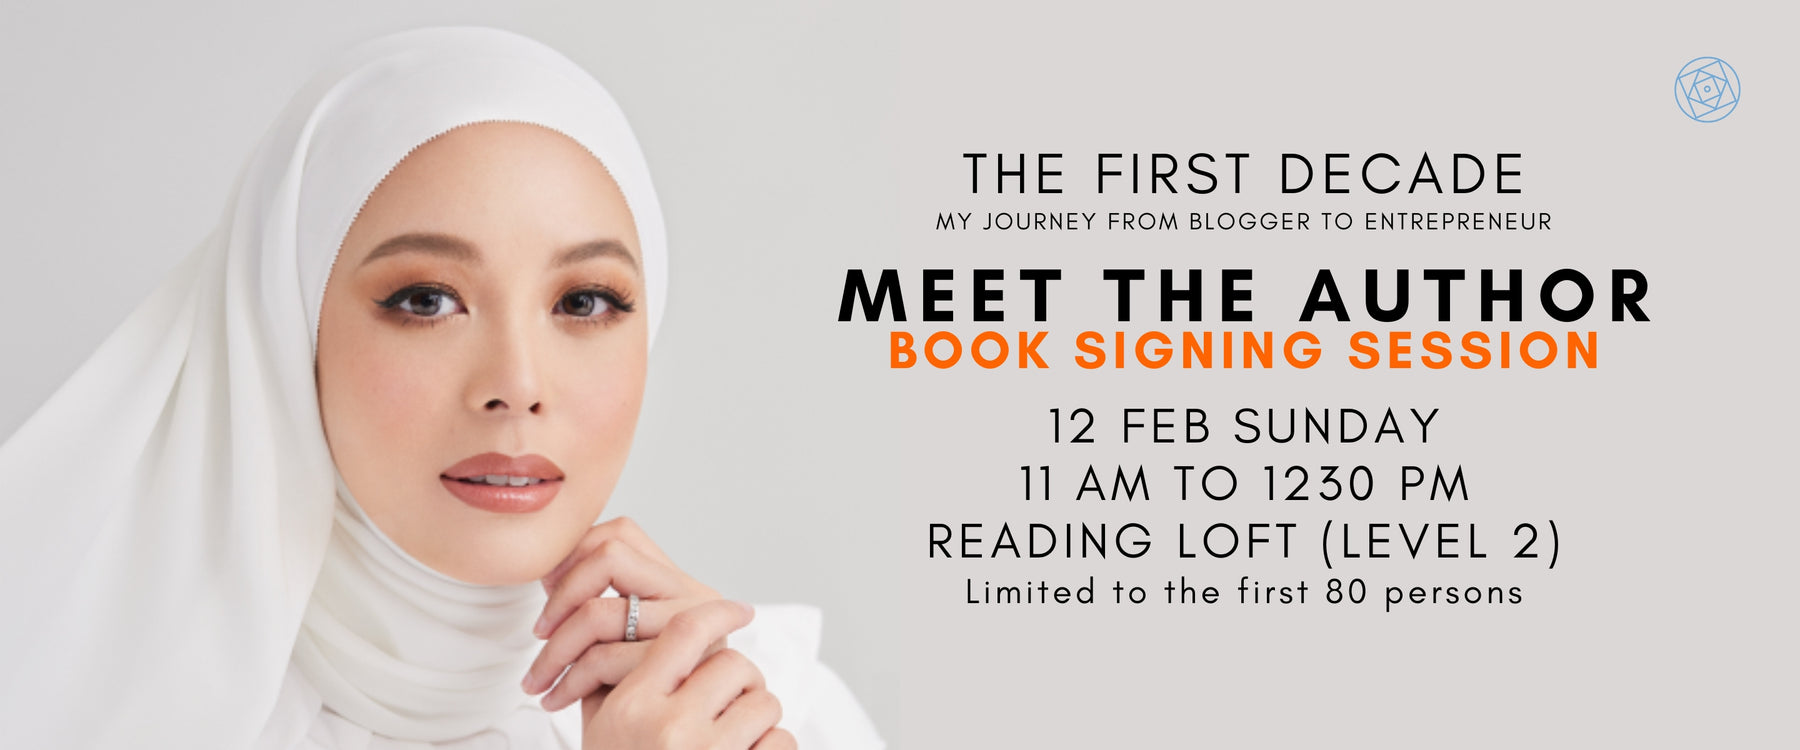 Author Session with Vivy Yusof